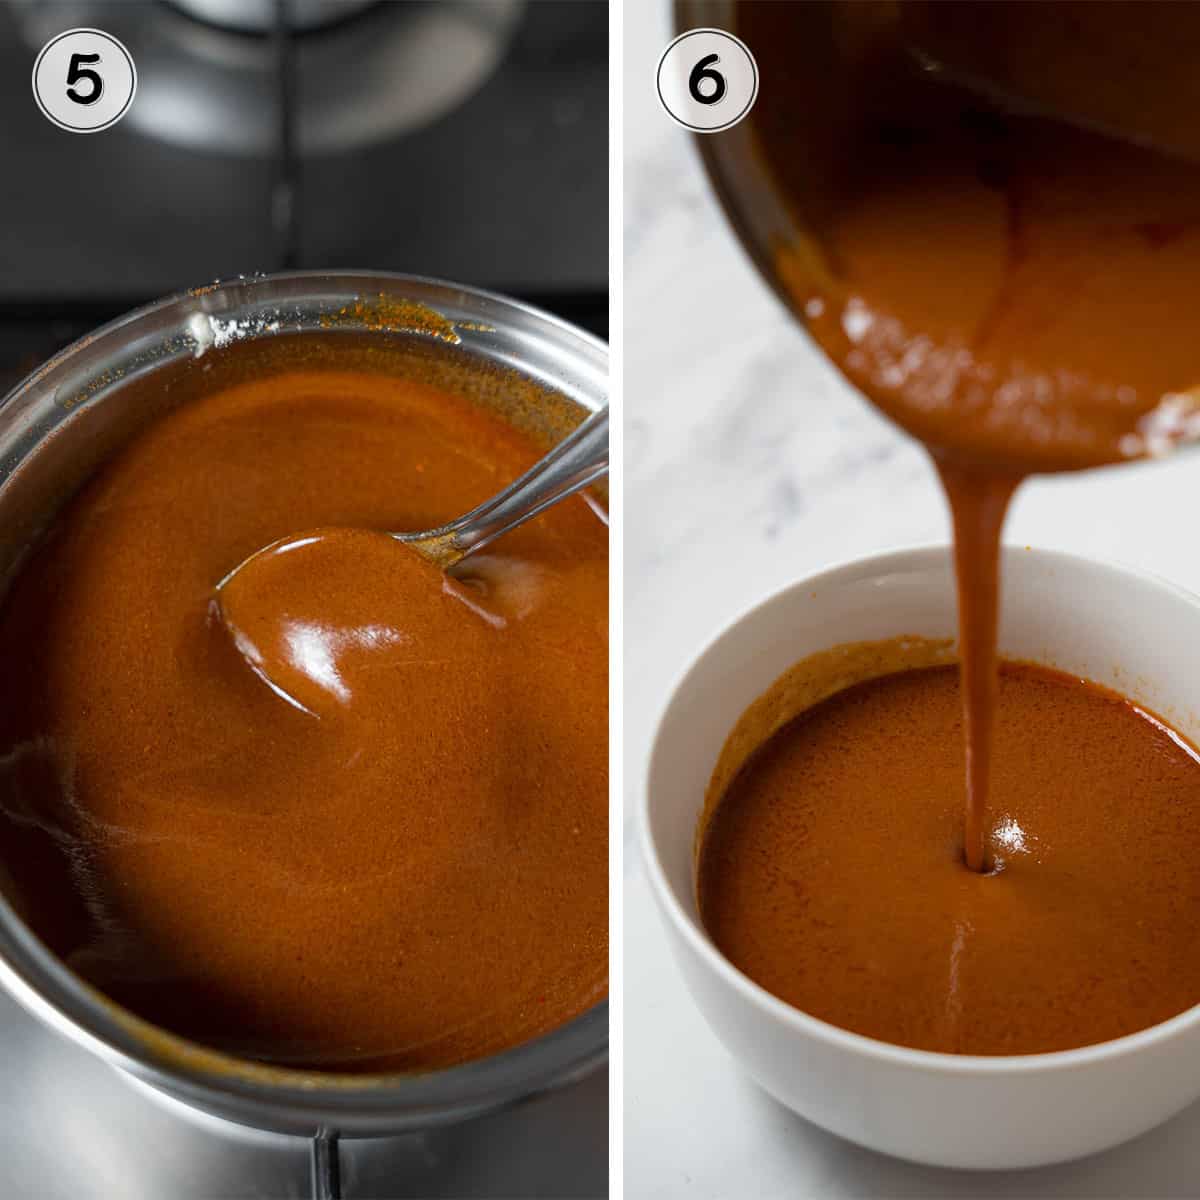 stirring bravas sauce in a pot and pouring it into a bowl.